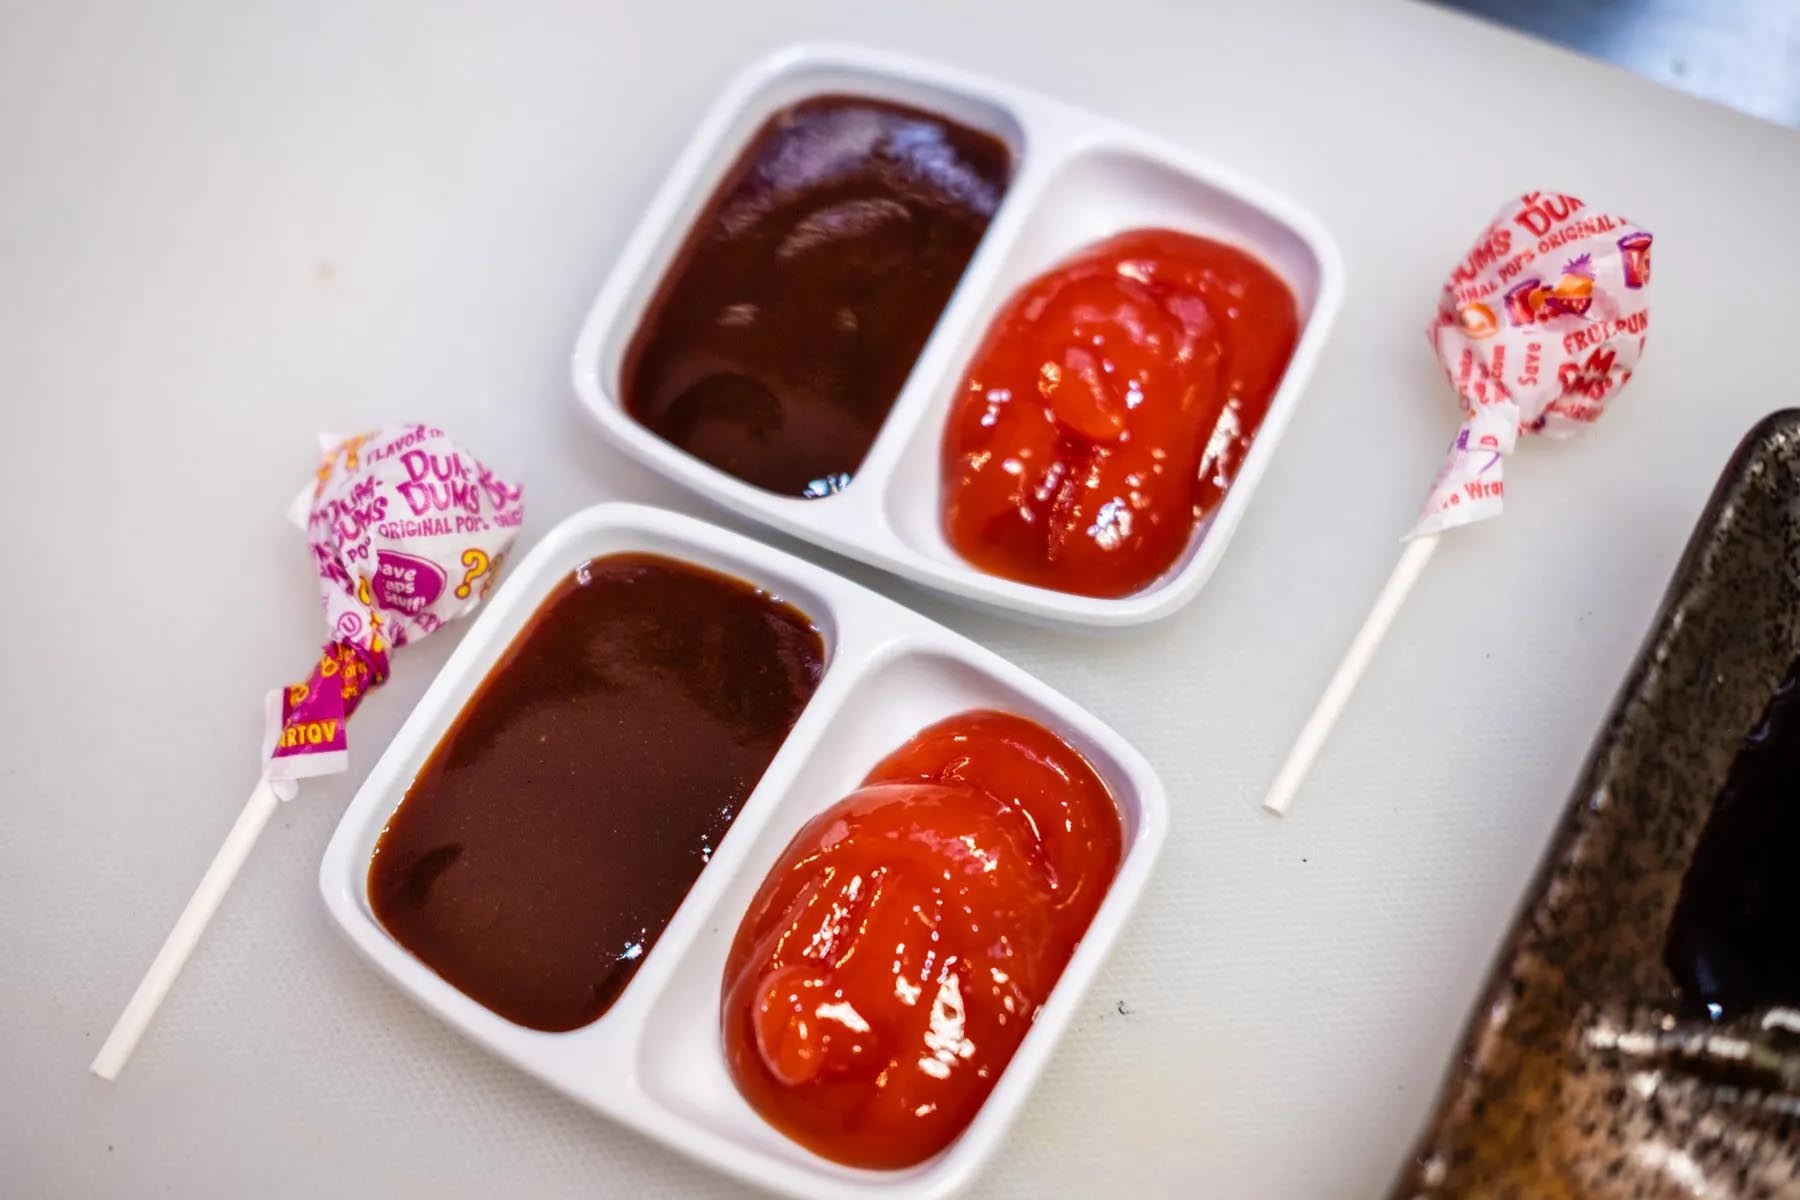 Dipping Sauces and Candy